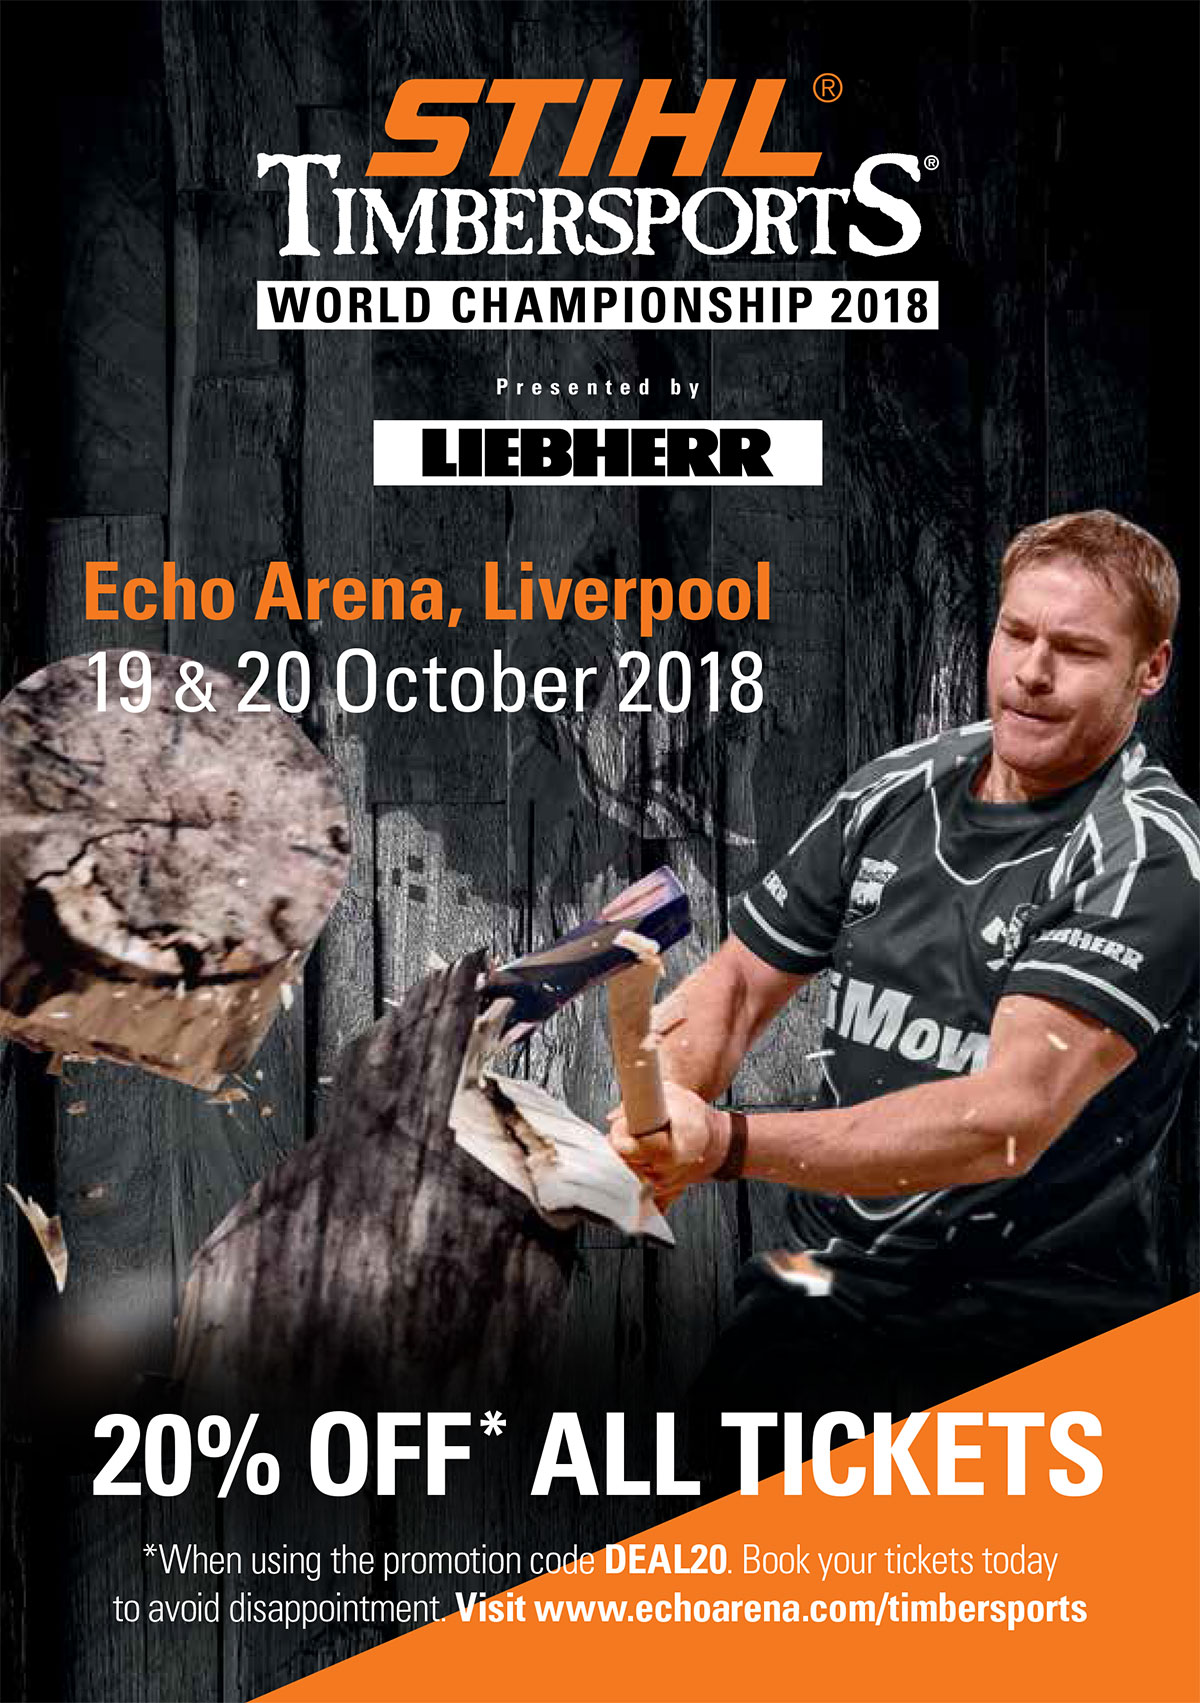 20%25 off all tickets using promotion code DEAL20